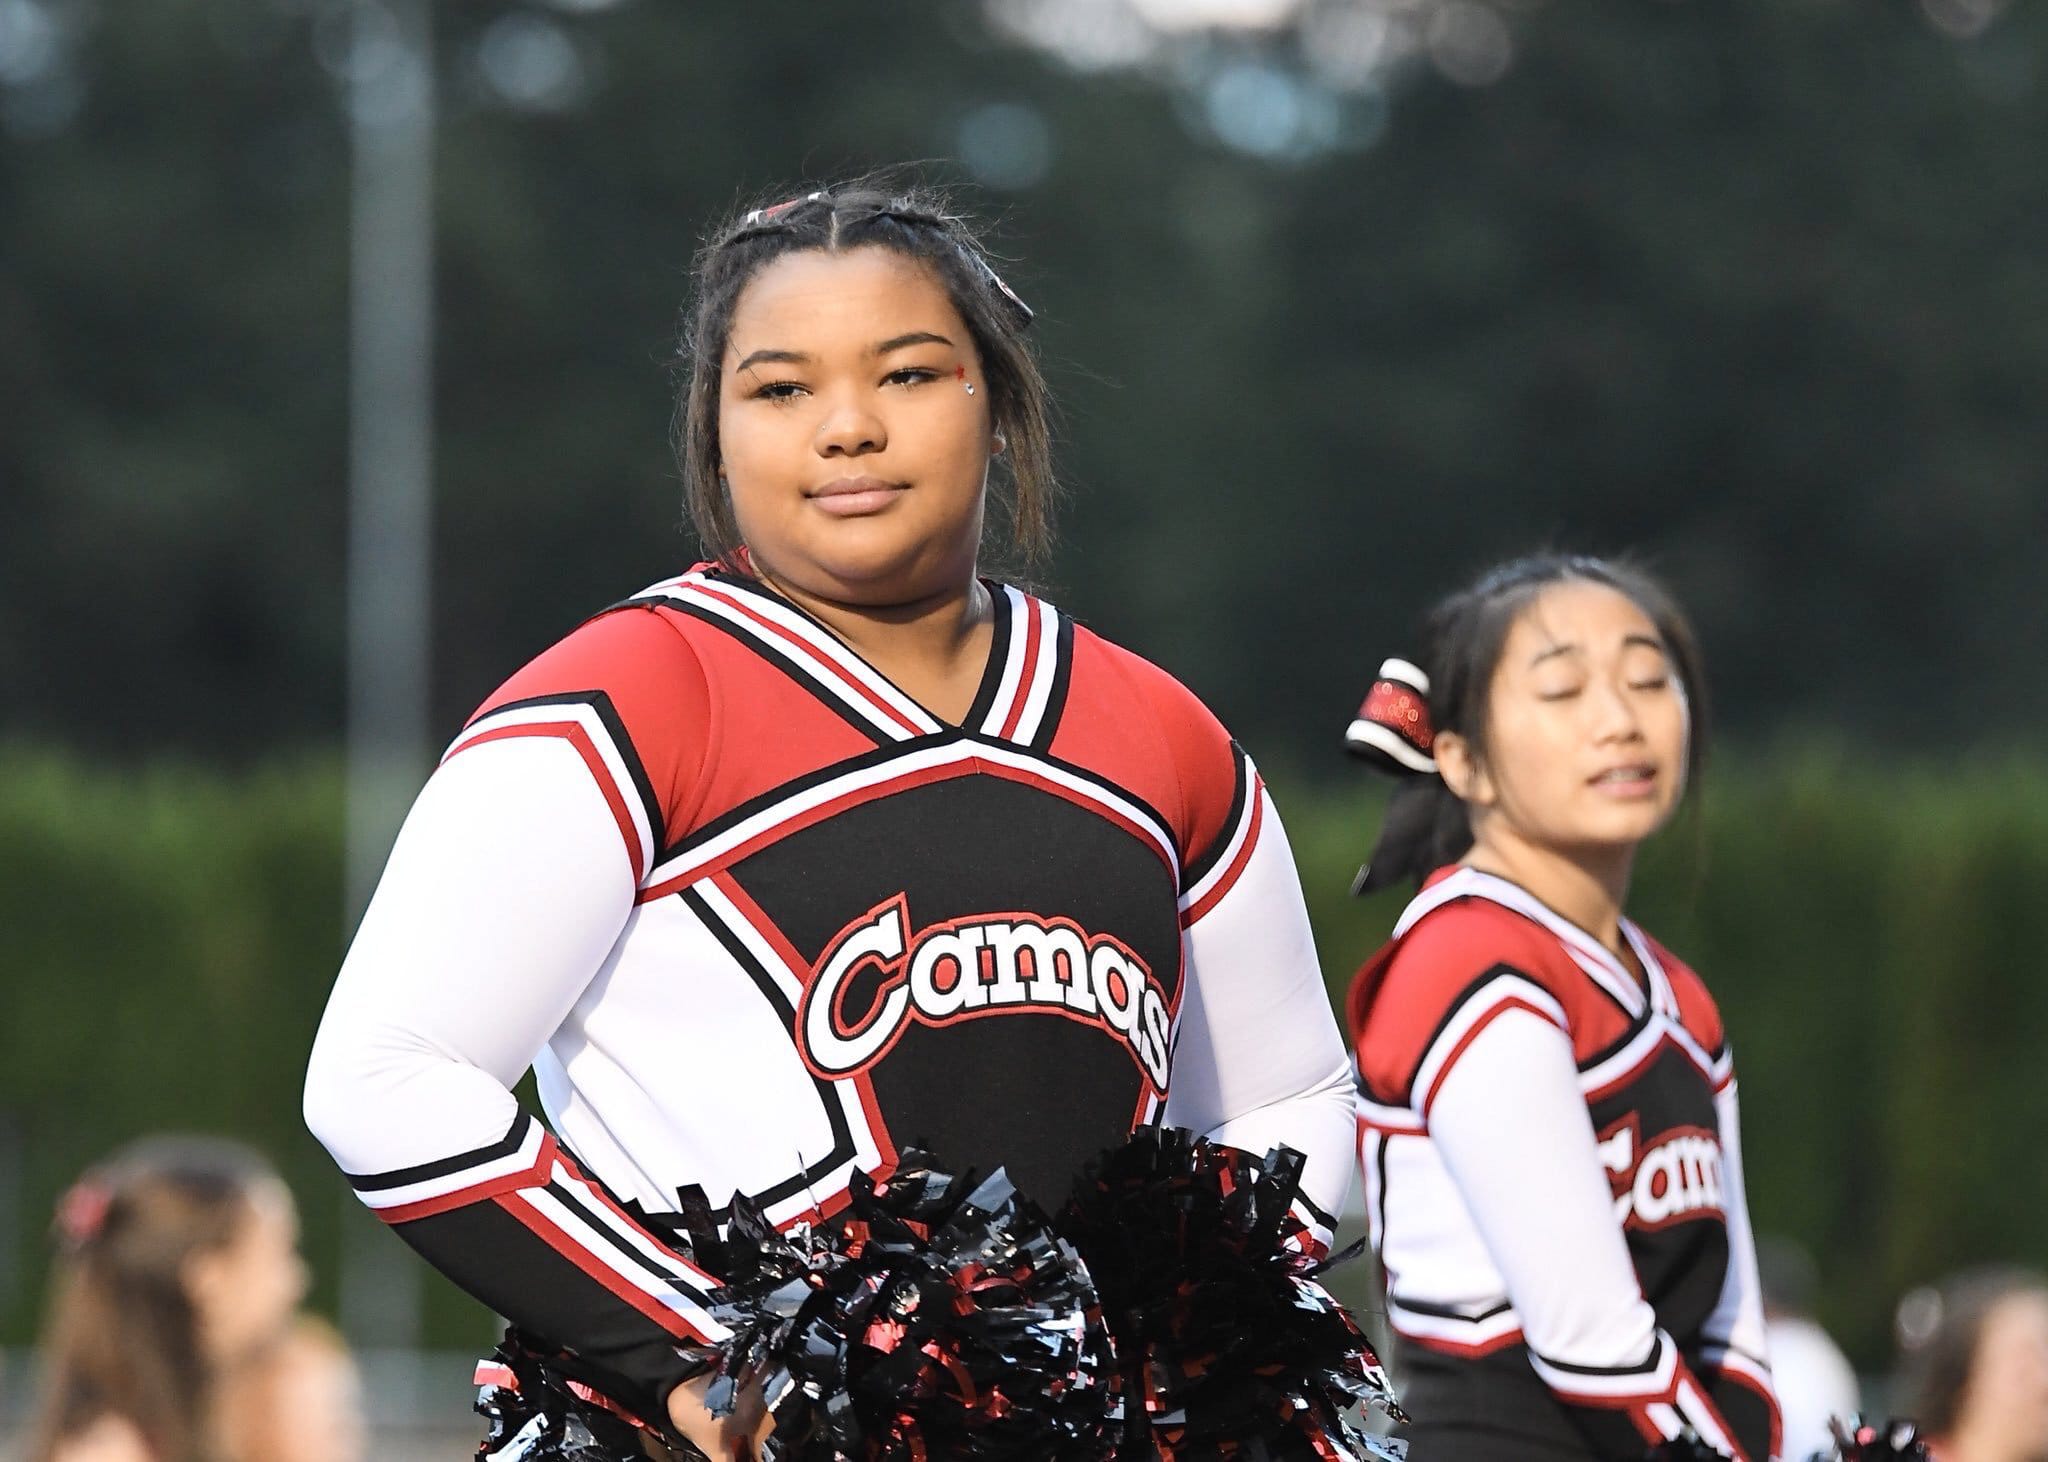 Alicea Devera graduated from Camas High School in June. She died on Sept. 9, two months after being diagnosed with brain cancer.